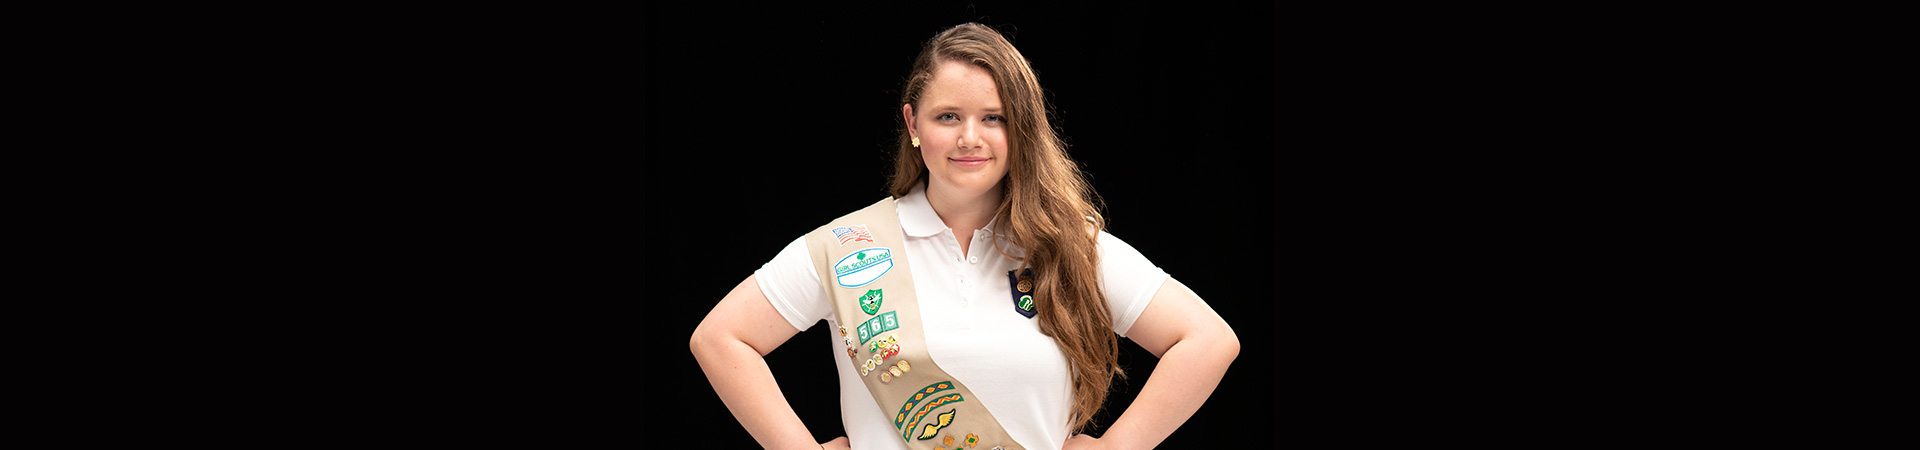  A Gold Award Girl Scout standing in front of a black background with her hands on her hips and a determined smile on her face 